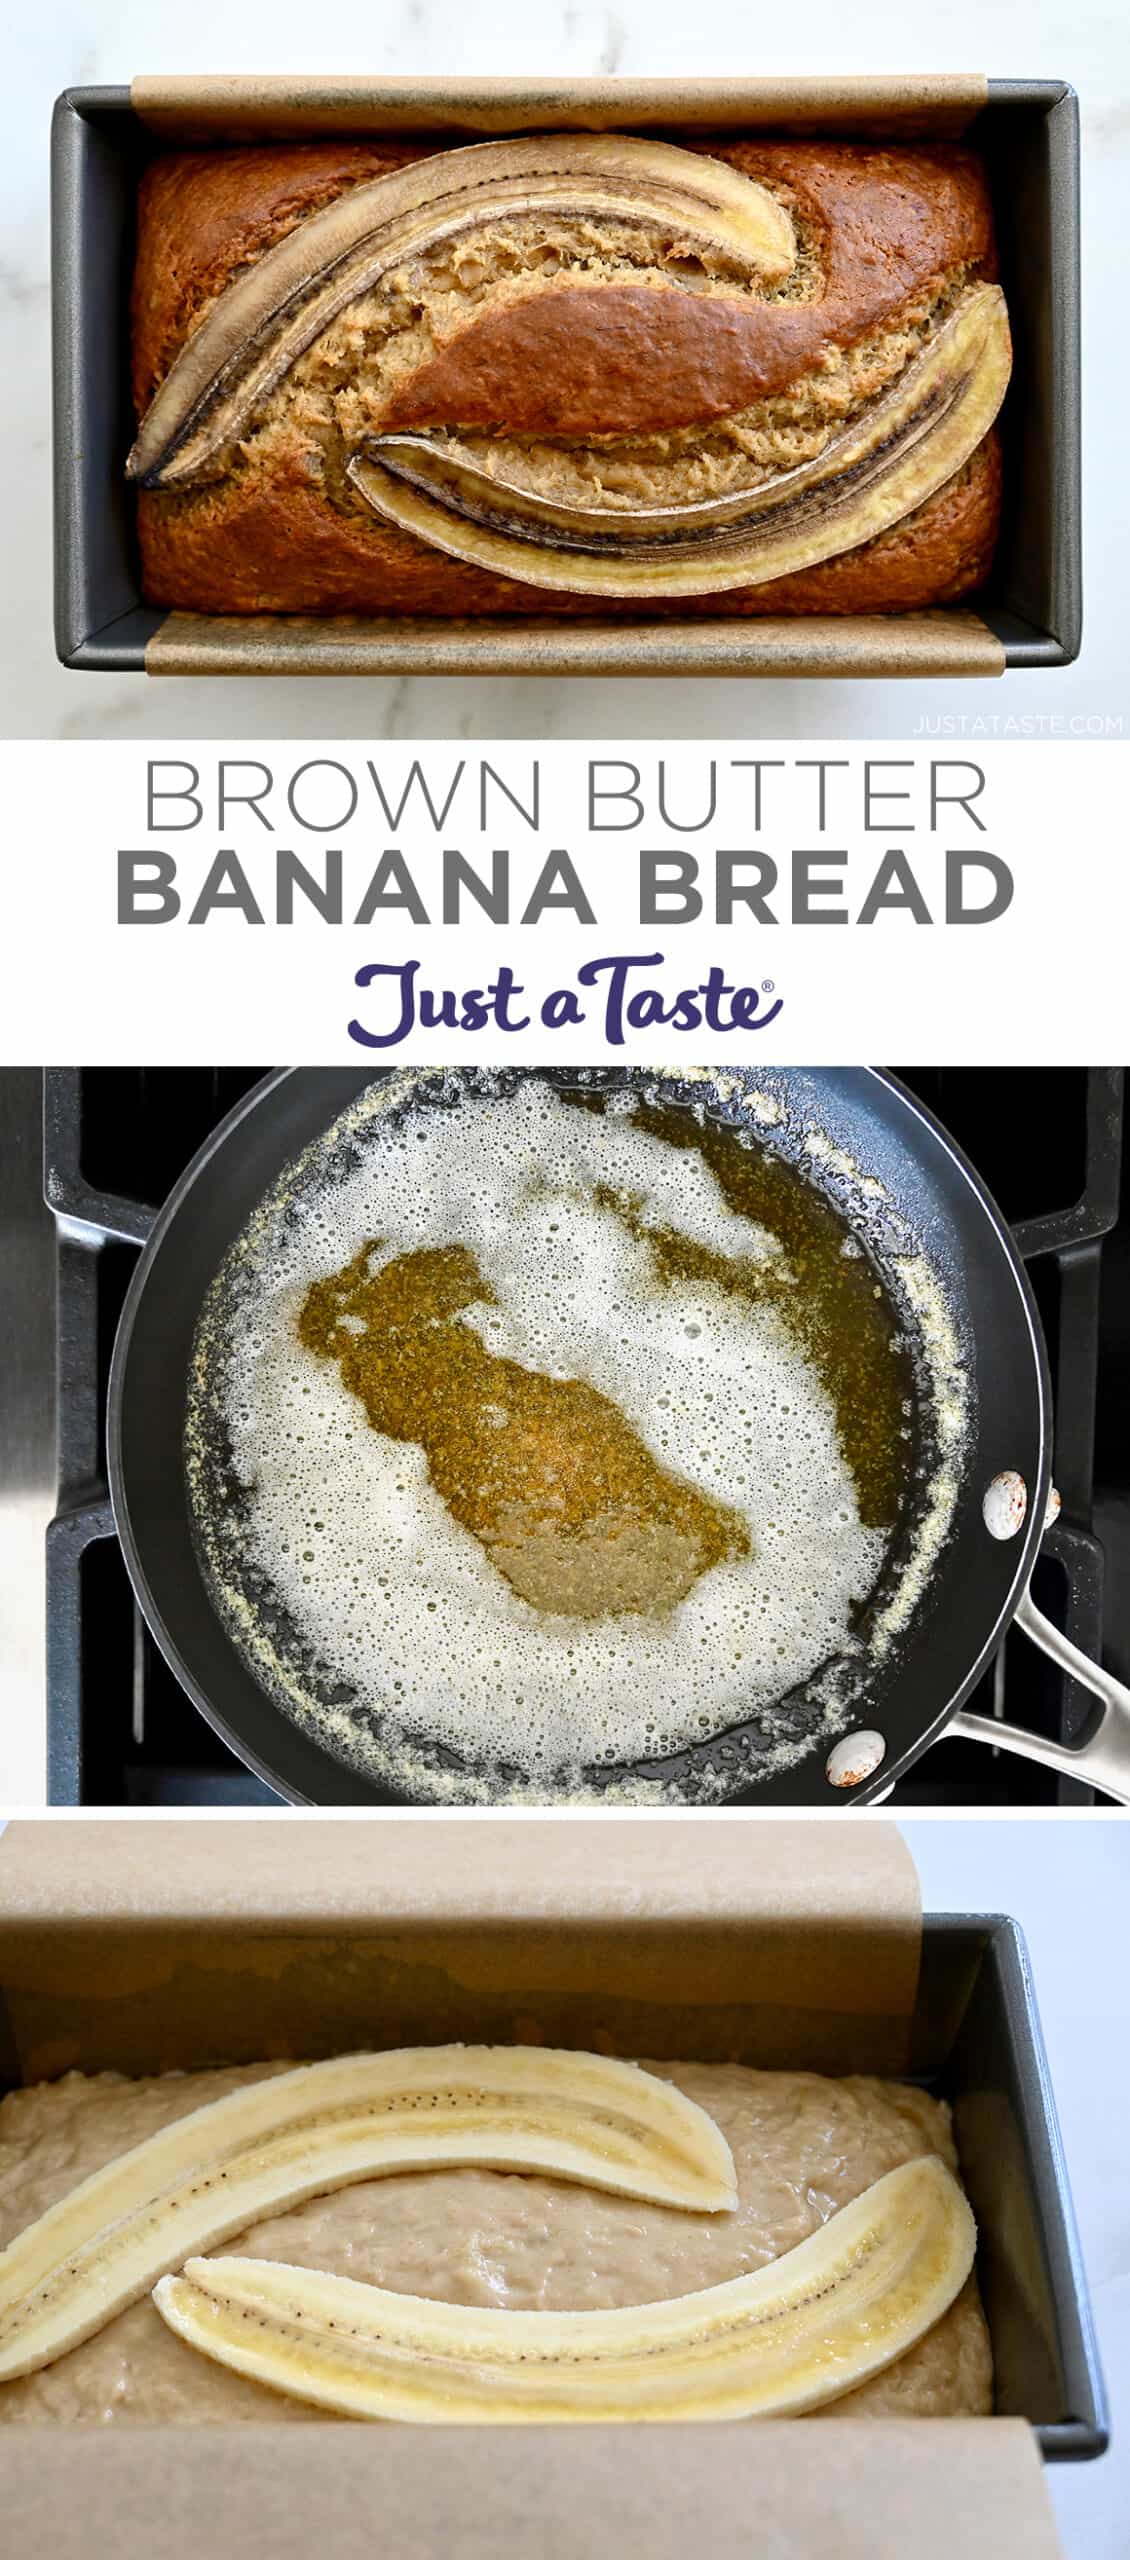 A vertical collage of images. Top image: A top-down view of a loaf pan containing perfectly golden brown butter banana bread topped with banana slices. Second image: A top-down view of a skillet containing golden butter. Third image: A top-down view of unbaked batter in a loaf pan lined with parchment paper.